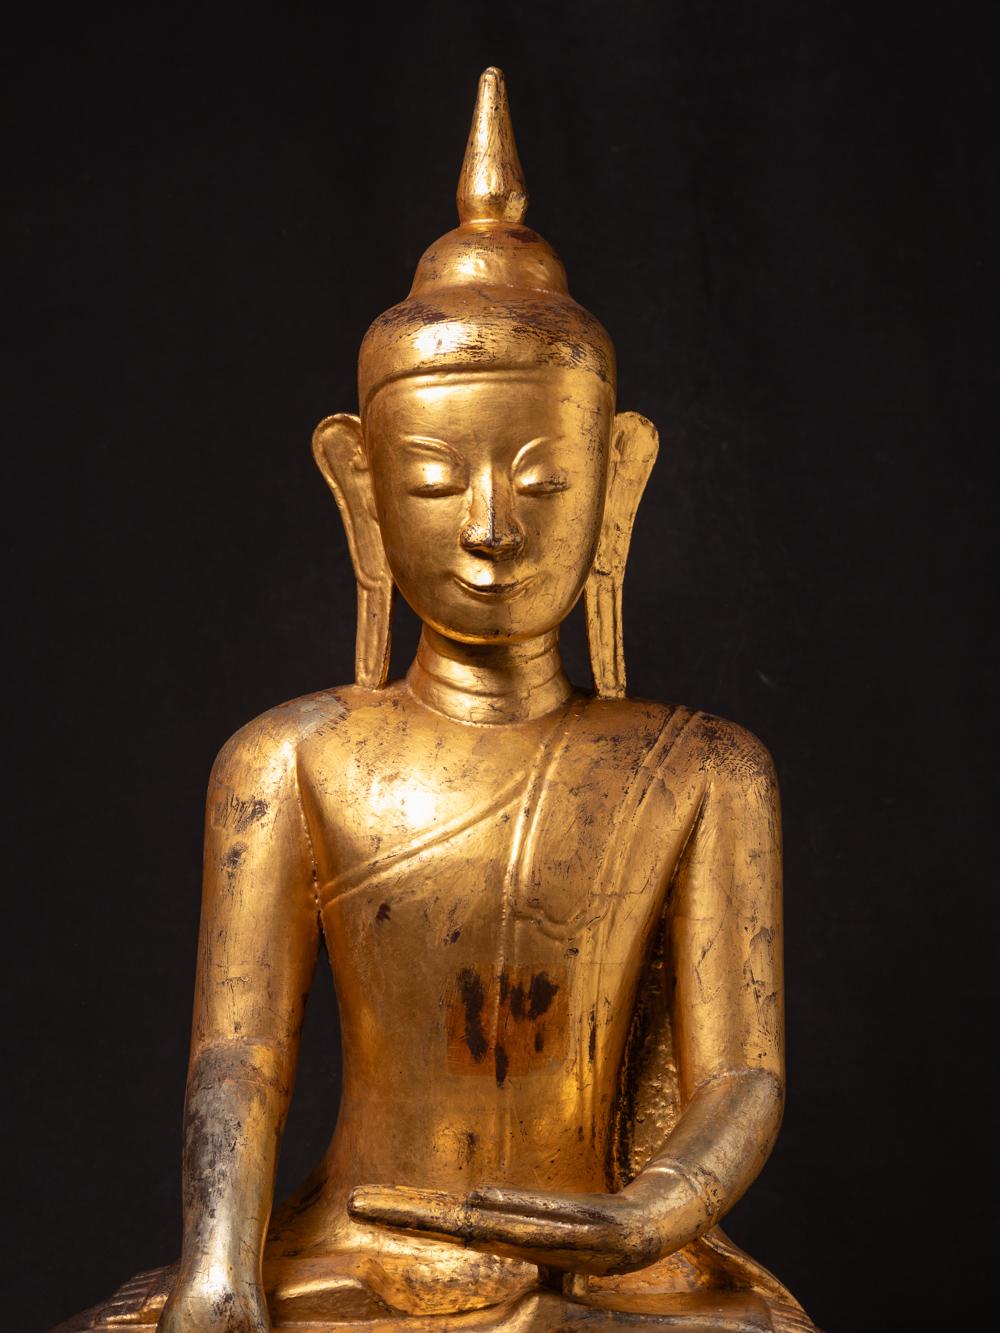 Material : wood
110 cm high
62 cm wide and 31 cm deep
Gilded with 24 krt. gold
Shan (Tai Yai) style
Bhumisparsha mudra
18th century
In very good condition !
A very special statue with a beautiful expression !
Weight: 37,6 kgs
Originating from